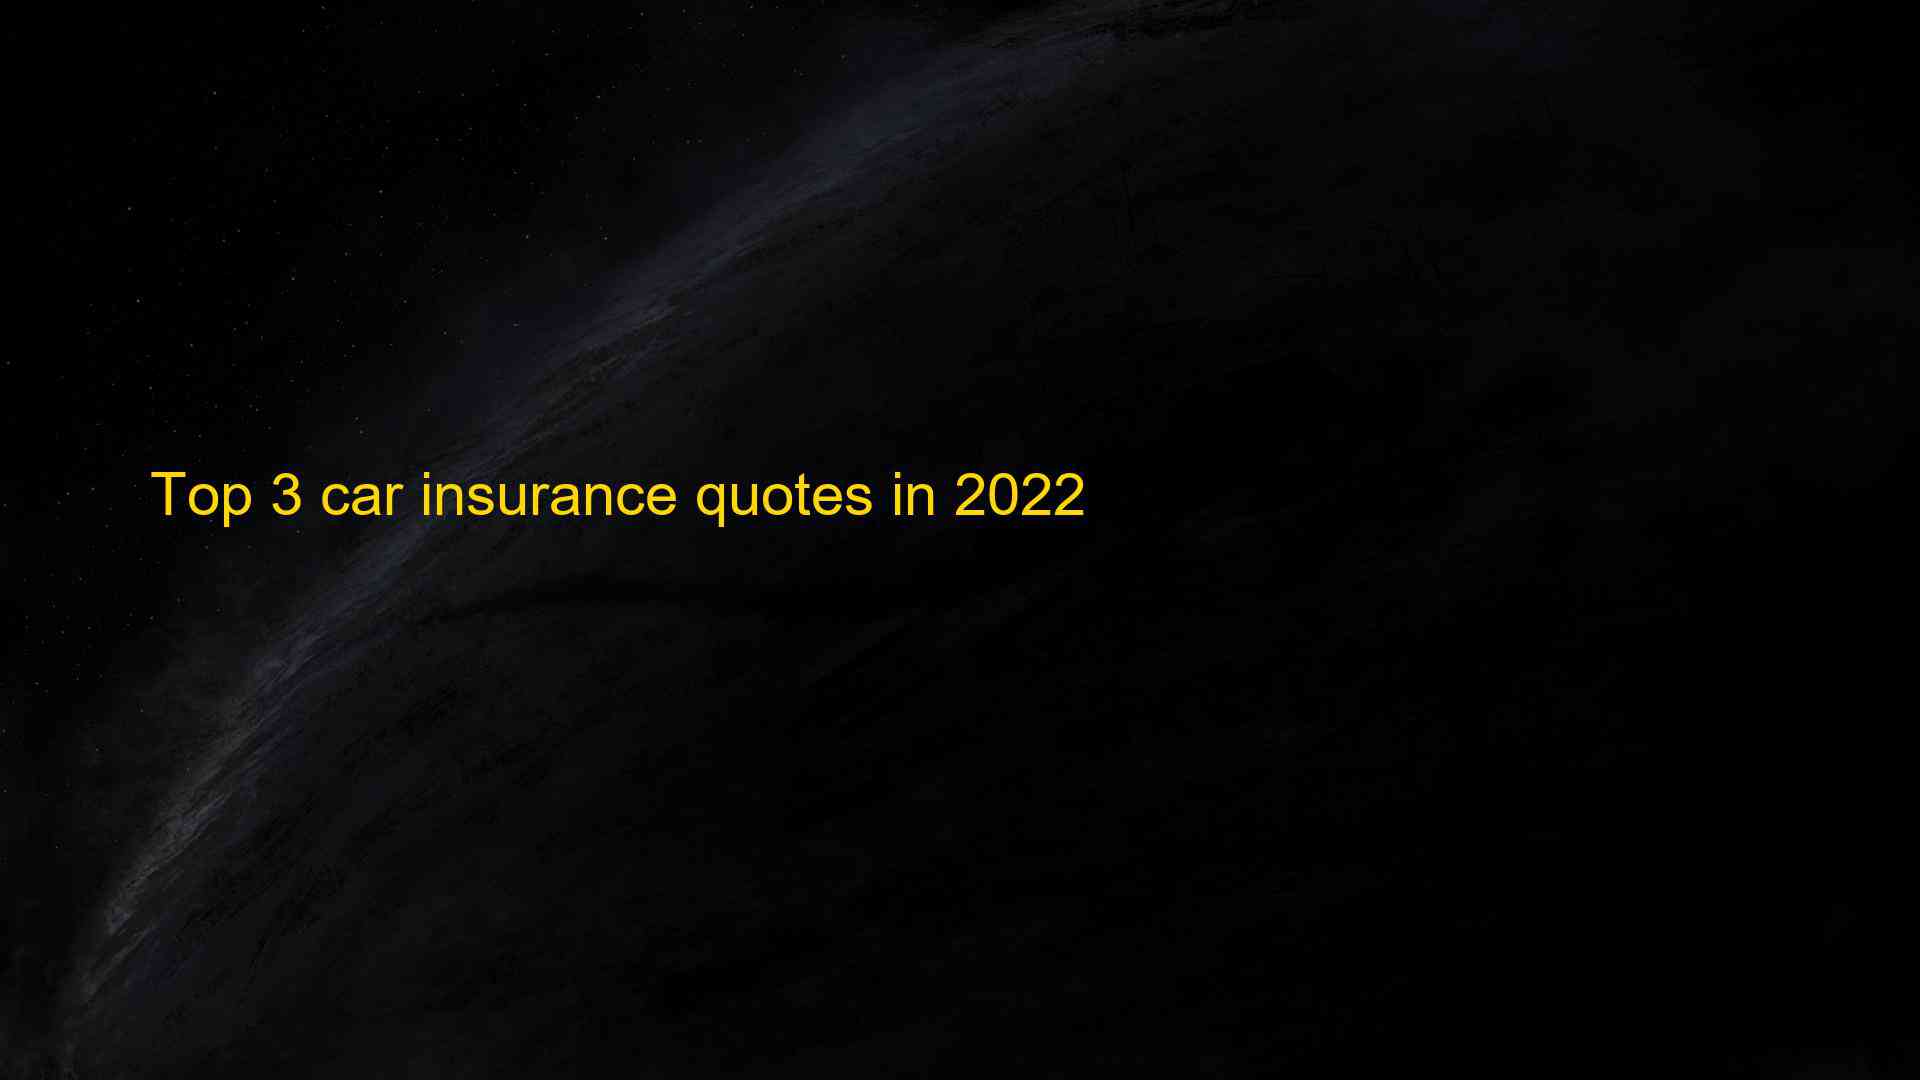 Top 3 car insurance quotes in 2022 1660259171